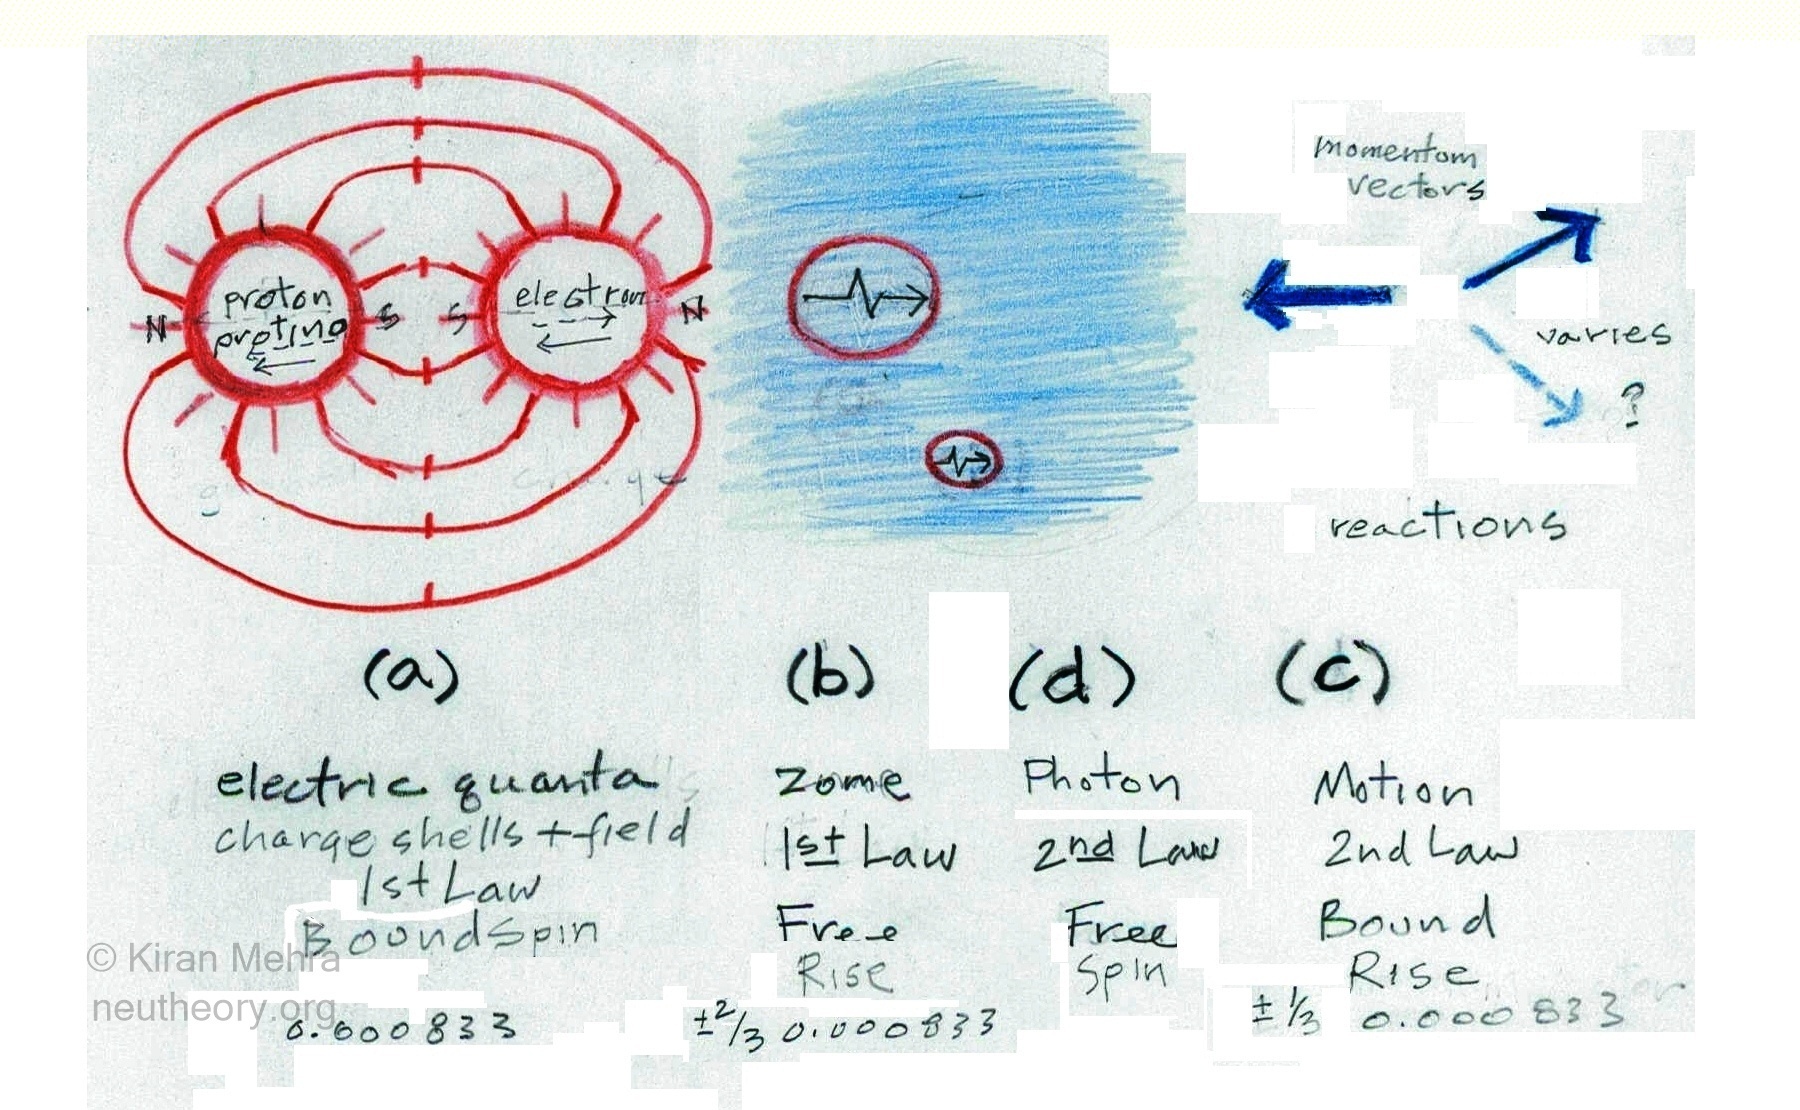 hand drawing showing the electric charge shells and photon bubbles as red circles, space as a blue shade and blue arrows representing motion